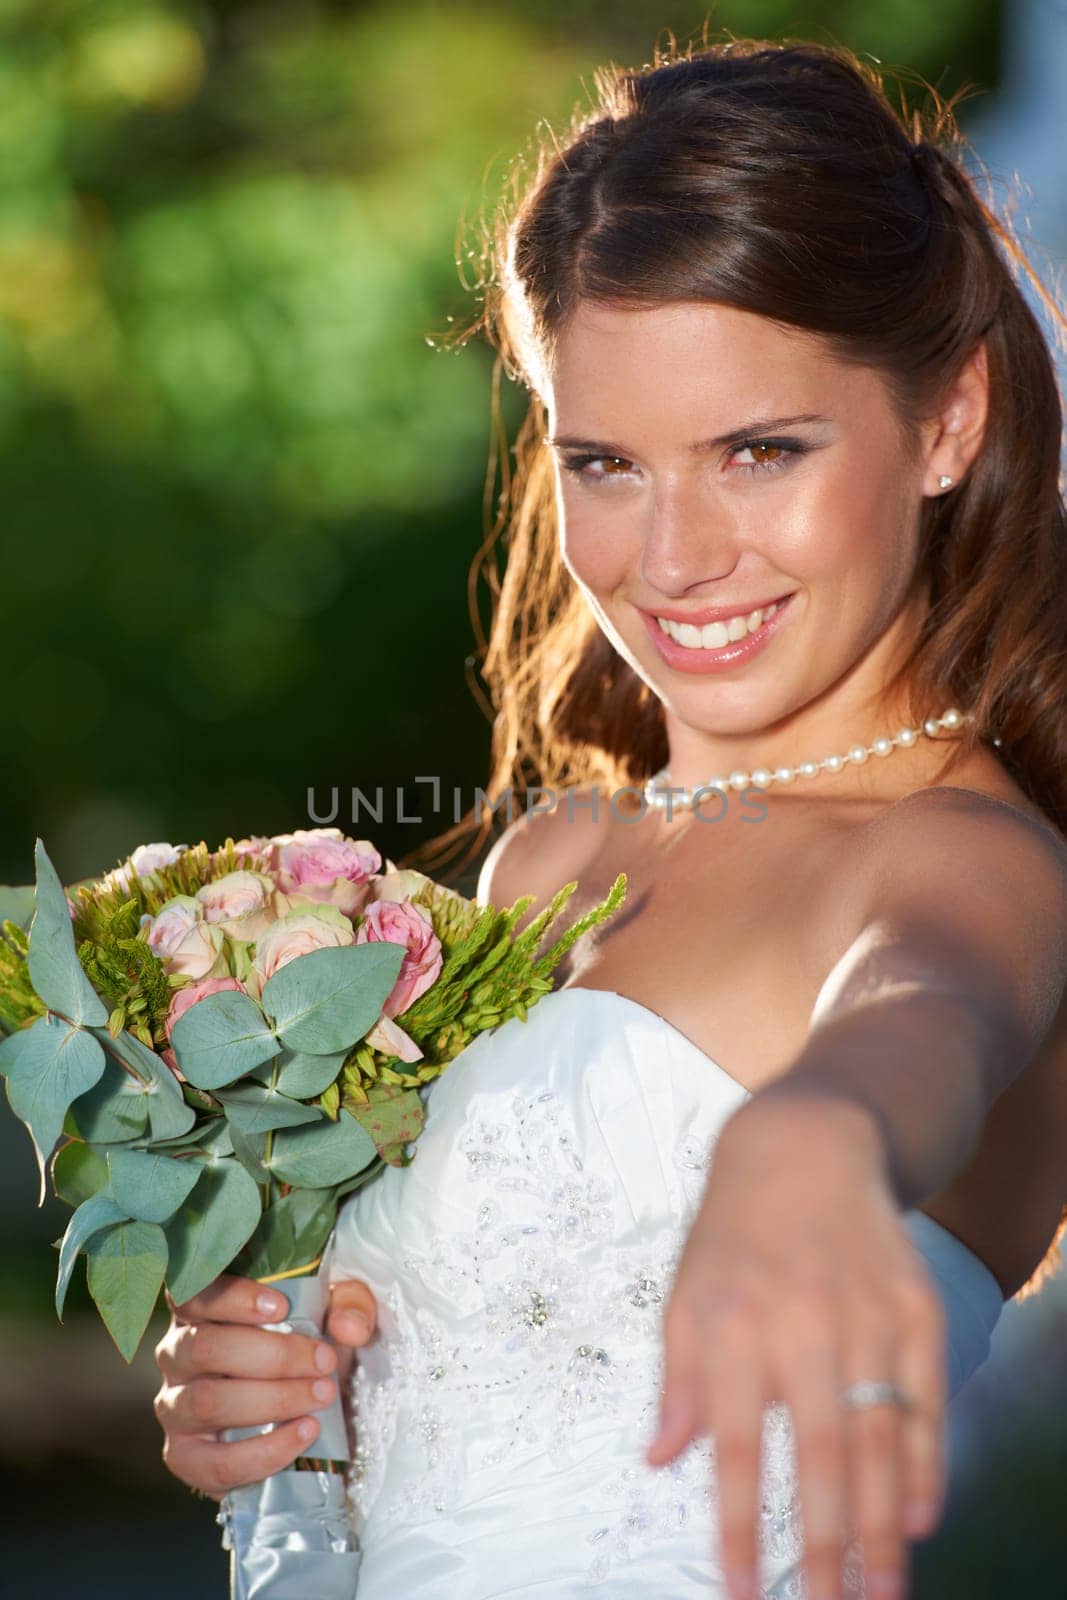 Bride, ring portrait and smile outdoor for love, wedding and celebration ceremony with confidence. Jewelry, woman and happy from future marriage, romance and formal event in a garden with a dress.